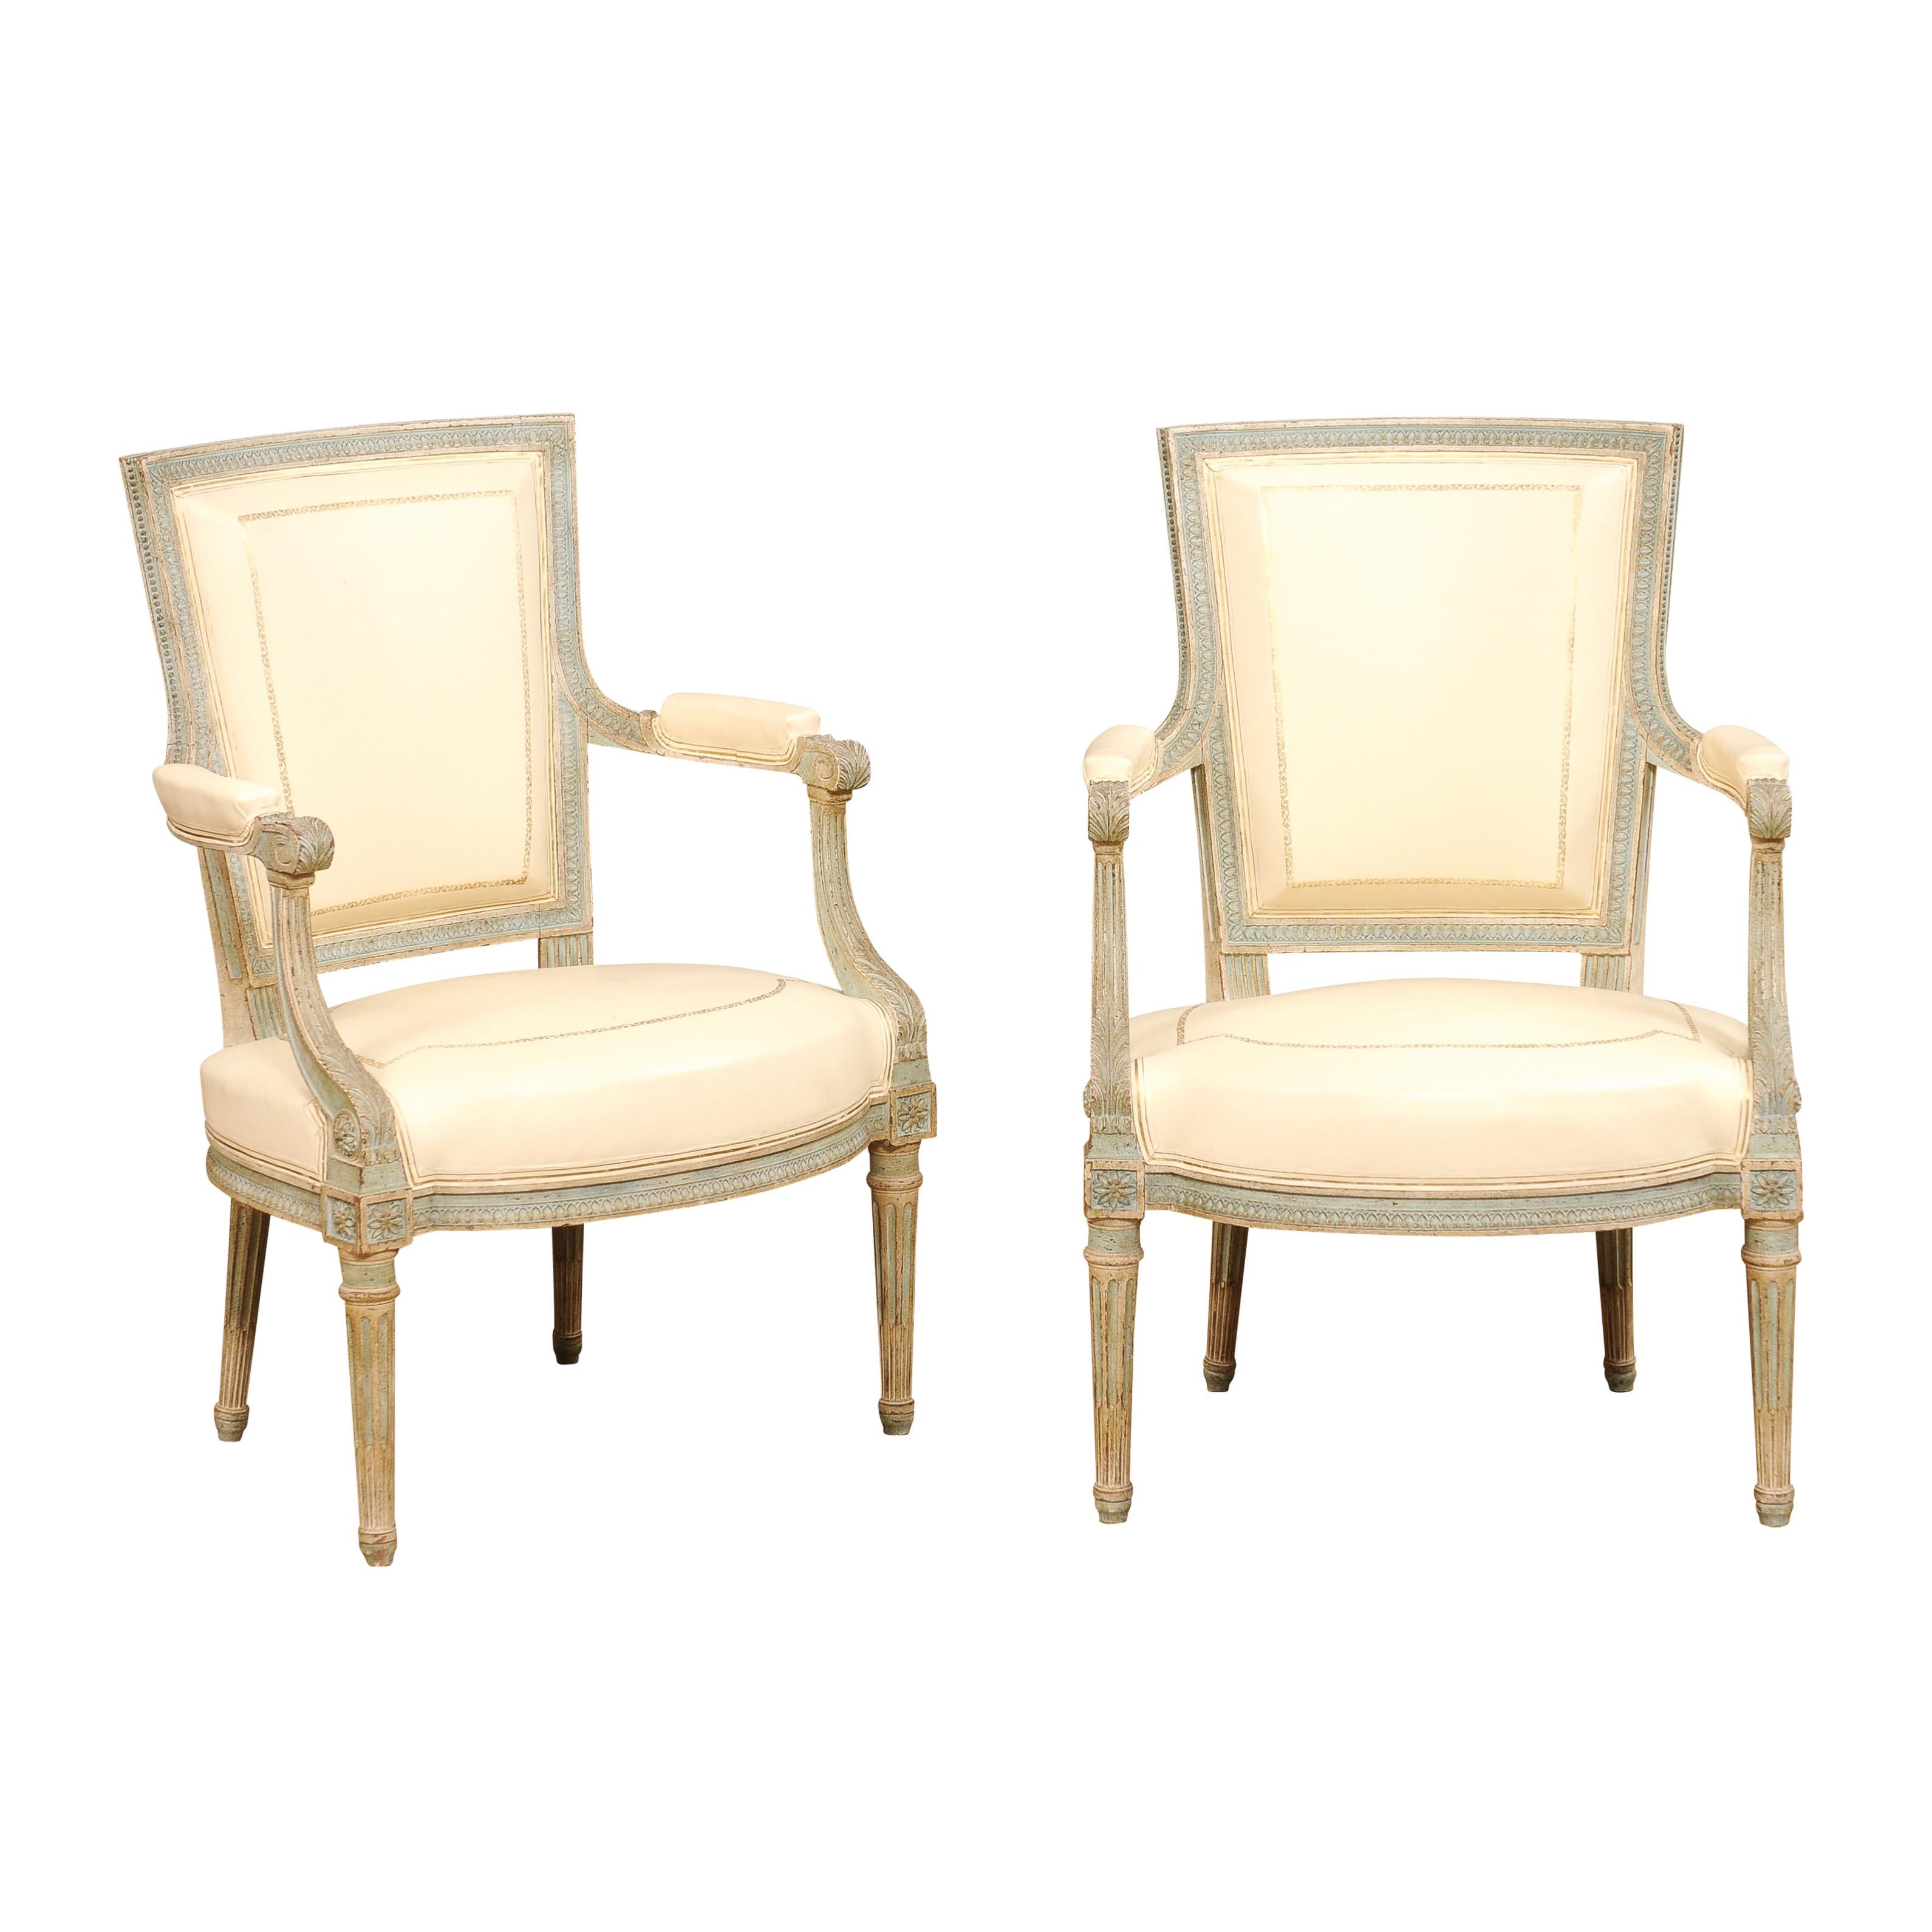 A pair of French Louis XVI style painted armchairs from the 20th century, with white leather upholstery, carved motifs and fluted legs. Emanating elegance and timeless design, this pair of French Louis XVI style painted armchairs from the 20th